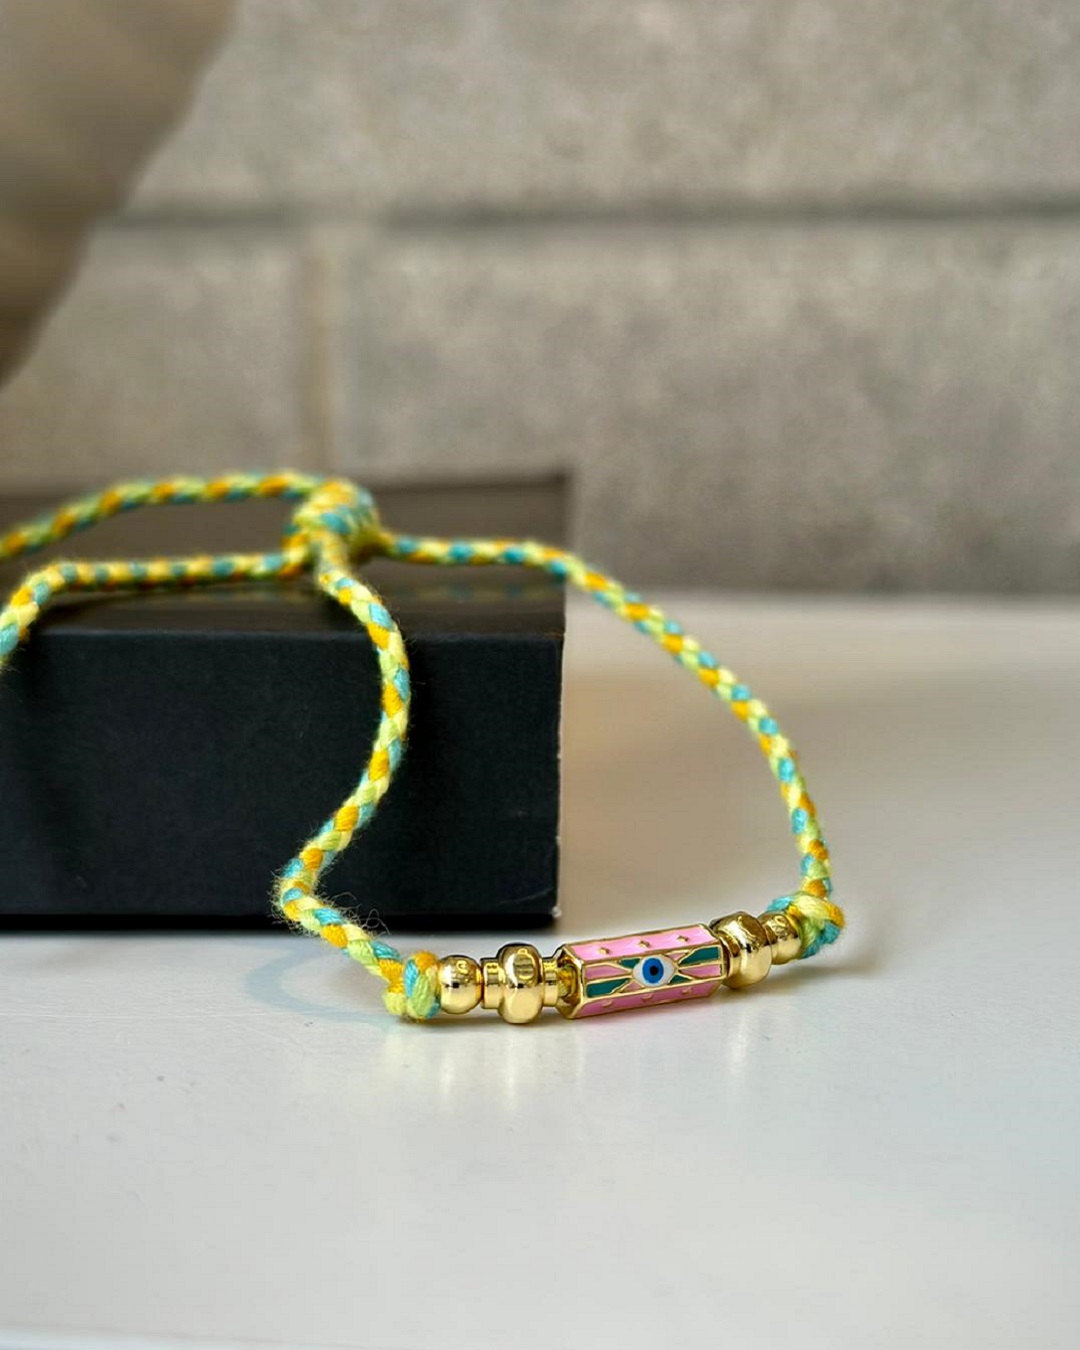 Woven yellow green and orange bracelet with eye charm